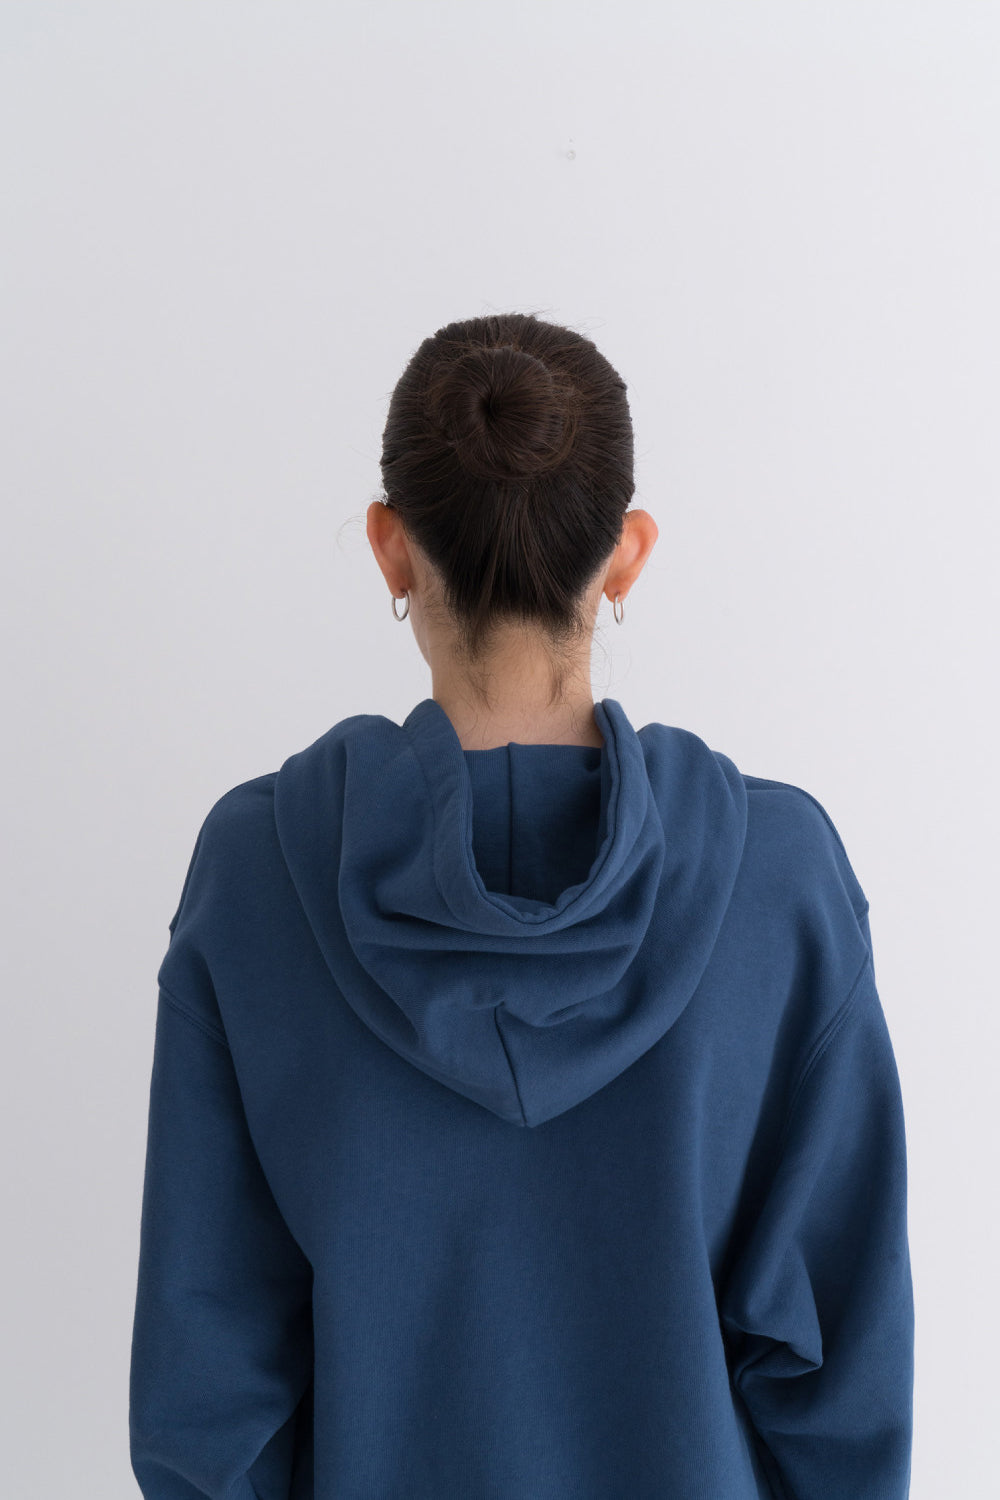 NOTA Signal String Hood Blue Modest Long-Sleeve Women's Sweater with Front Pockets, Hoodie, Loose Fit 100% Cotton